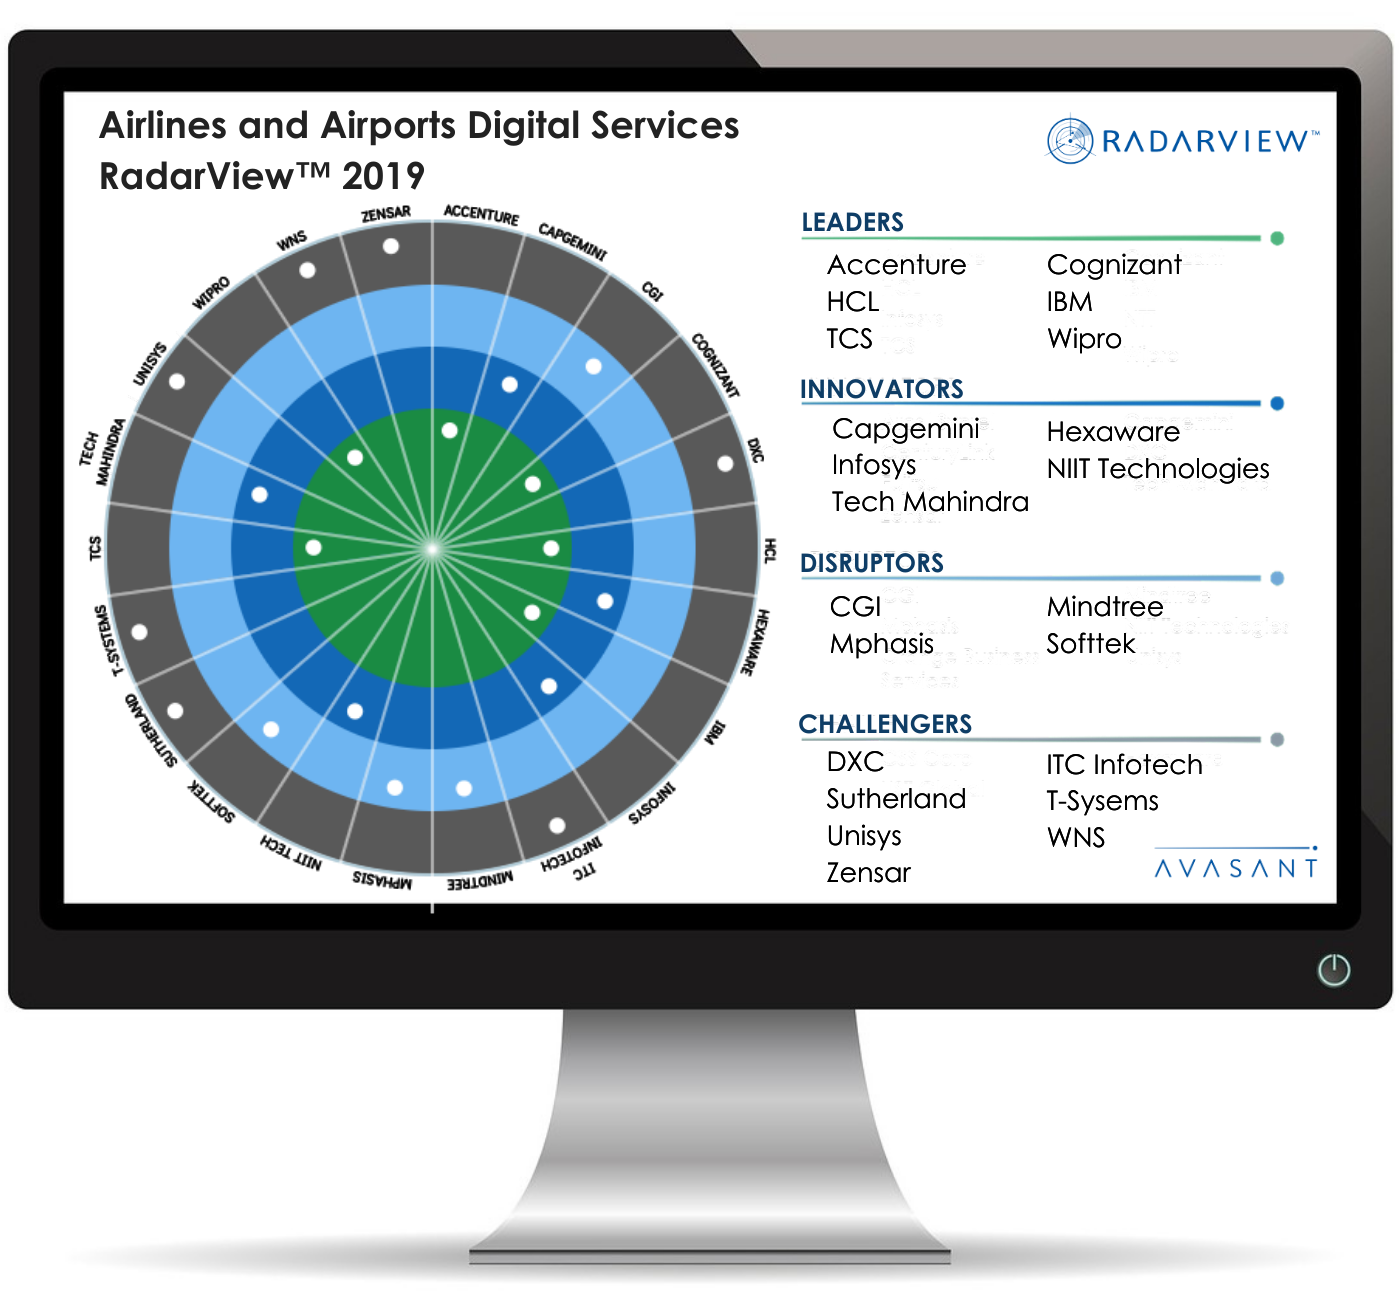 Airlines Airports 2019 RV web graphic 1 - Airlines and Airports Digital Services RadarView™ 2019 - Unisys